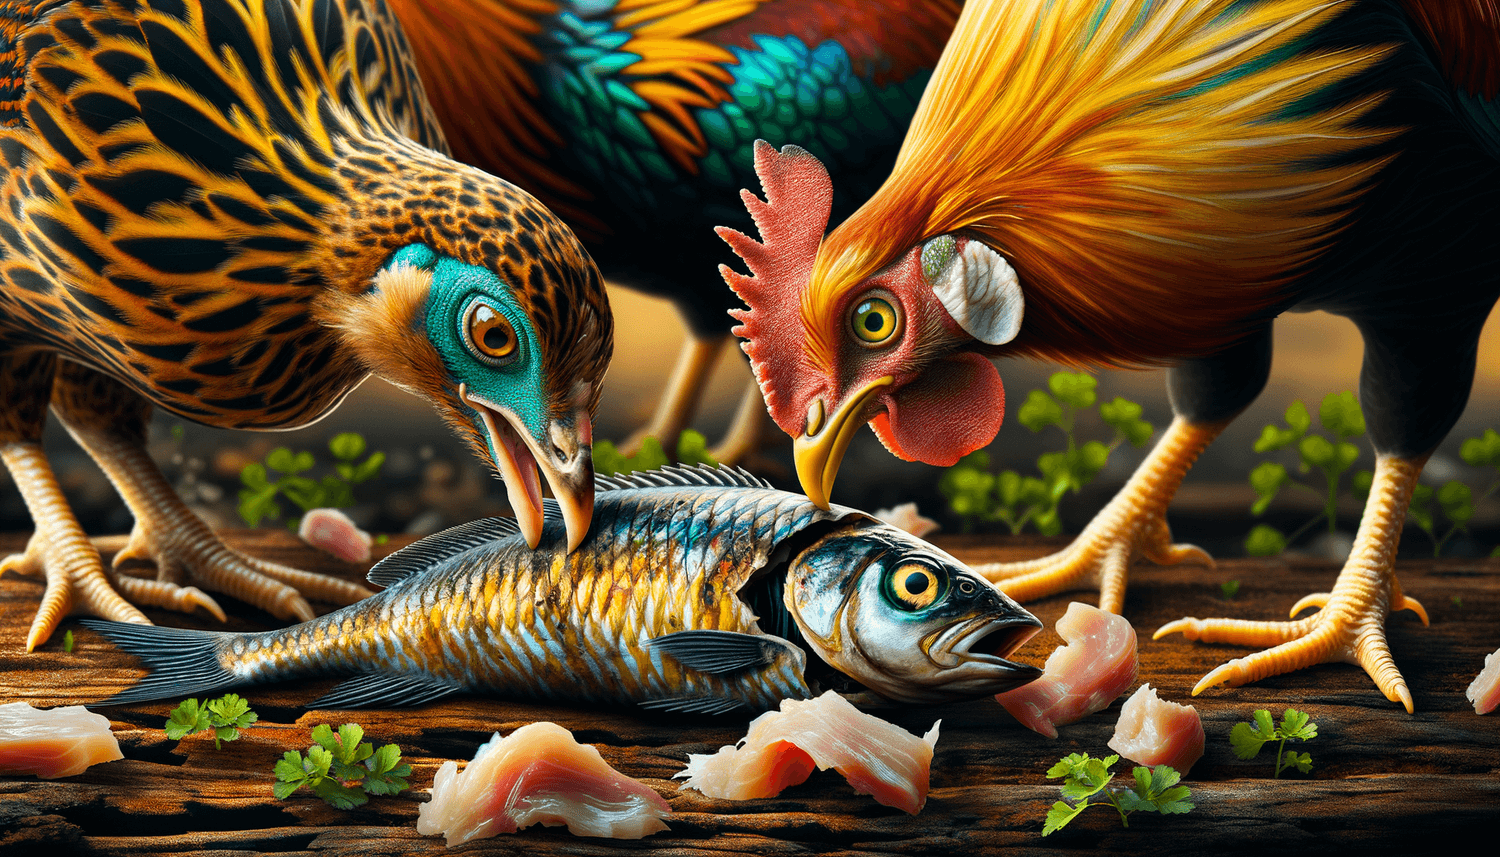 Can Chickens Eat Fish?